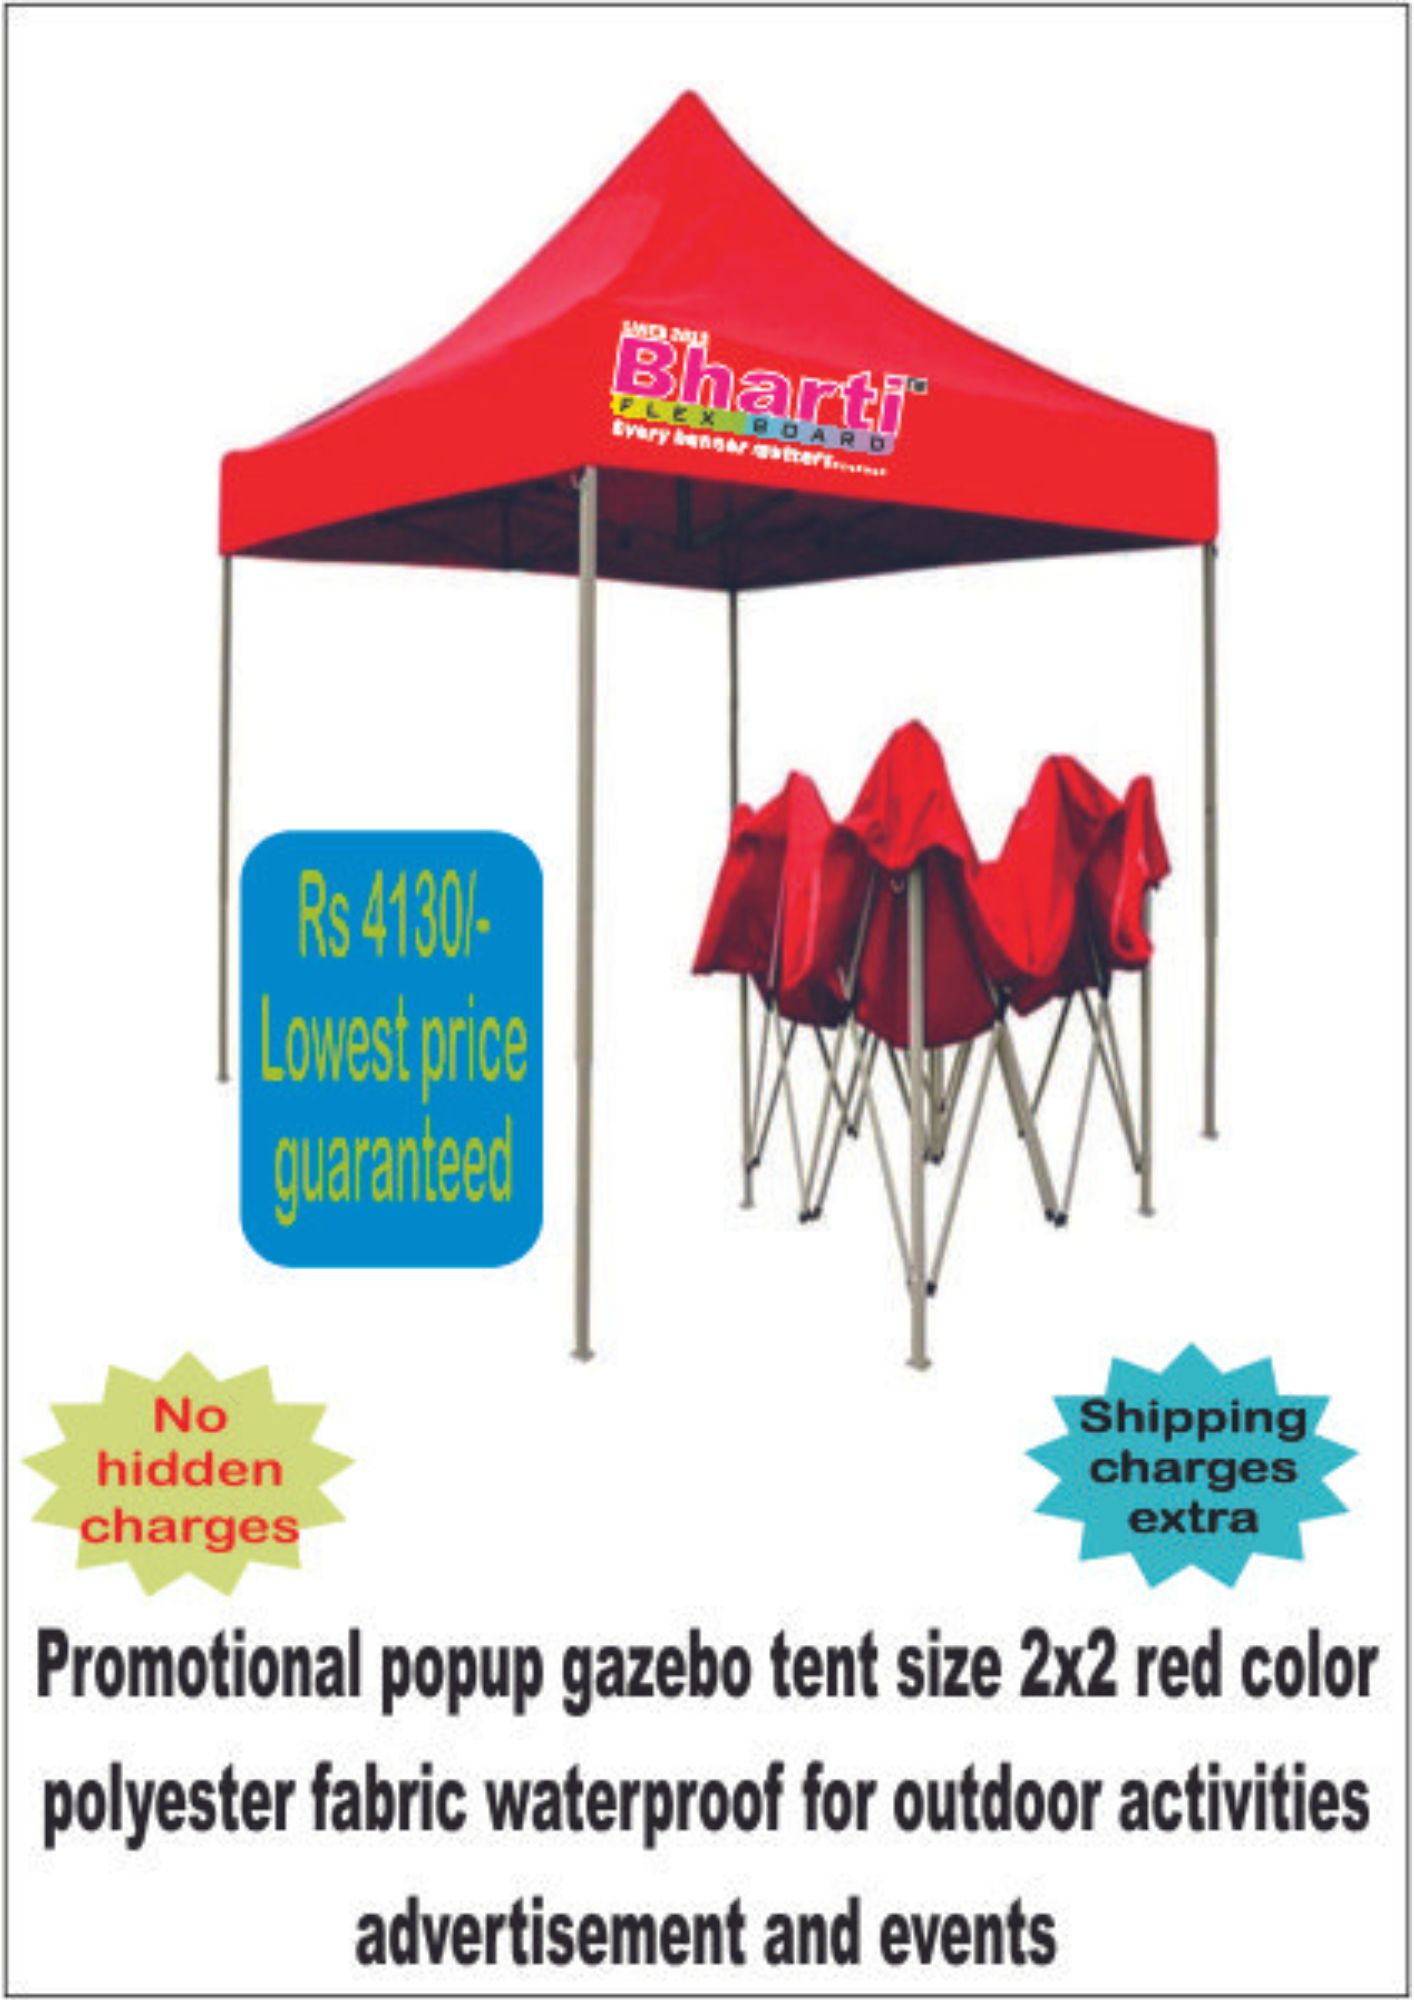 Gazebo Tent red size 2x2 meters portable and foldable pop-up canopy tent  8x8 feet for events